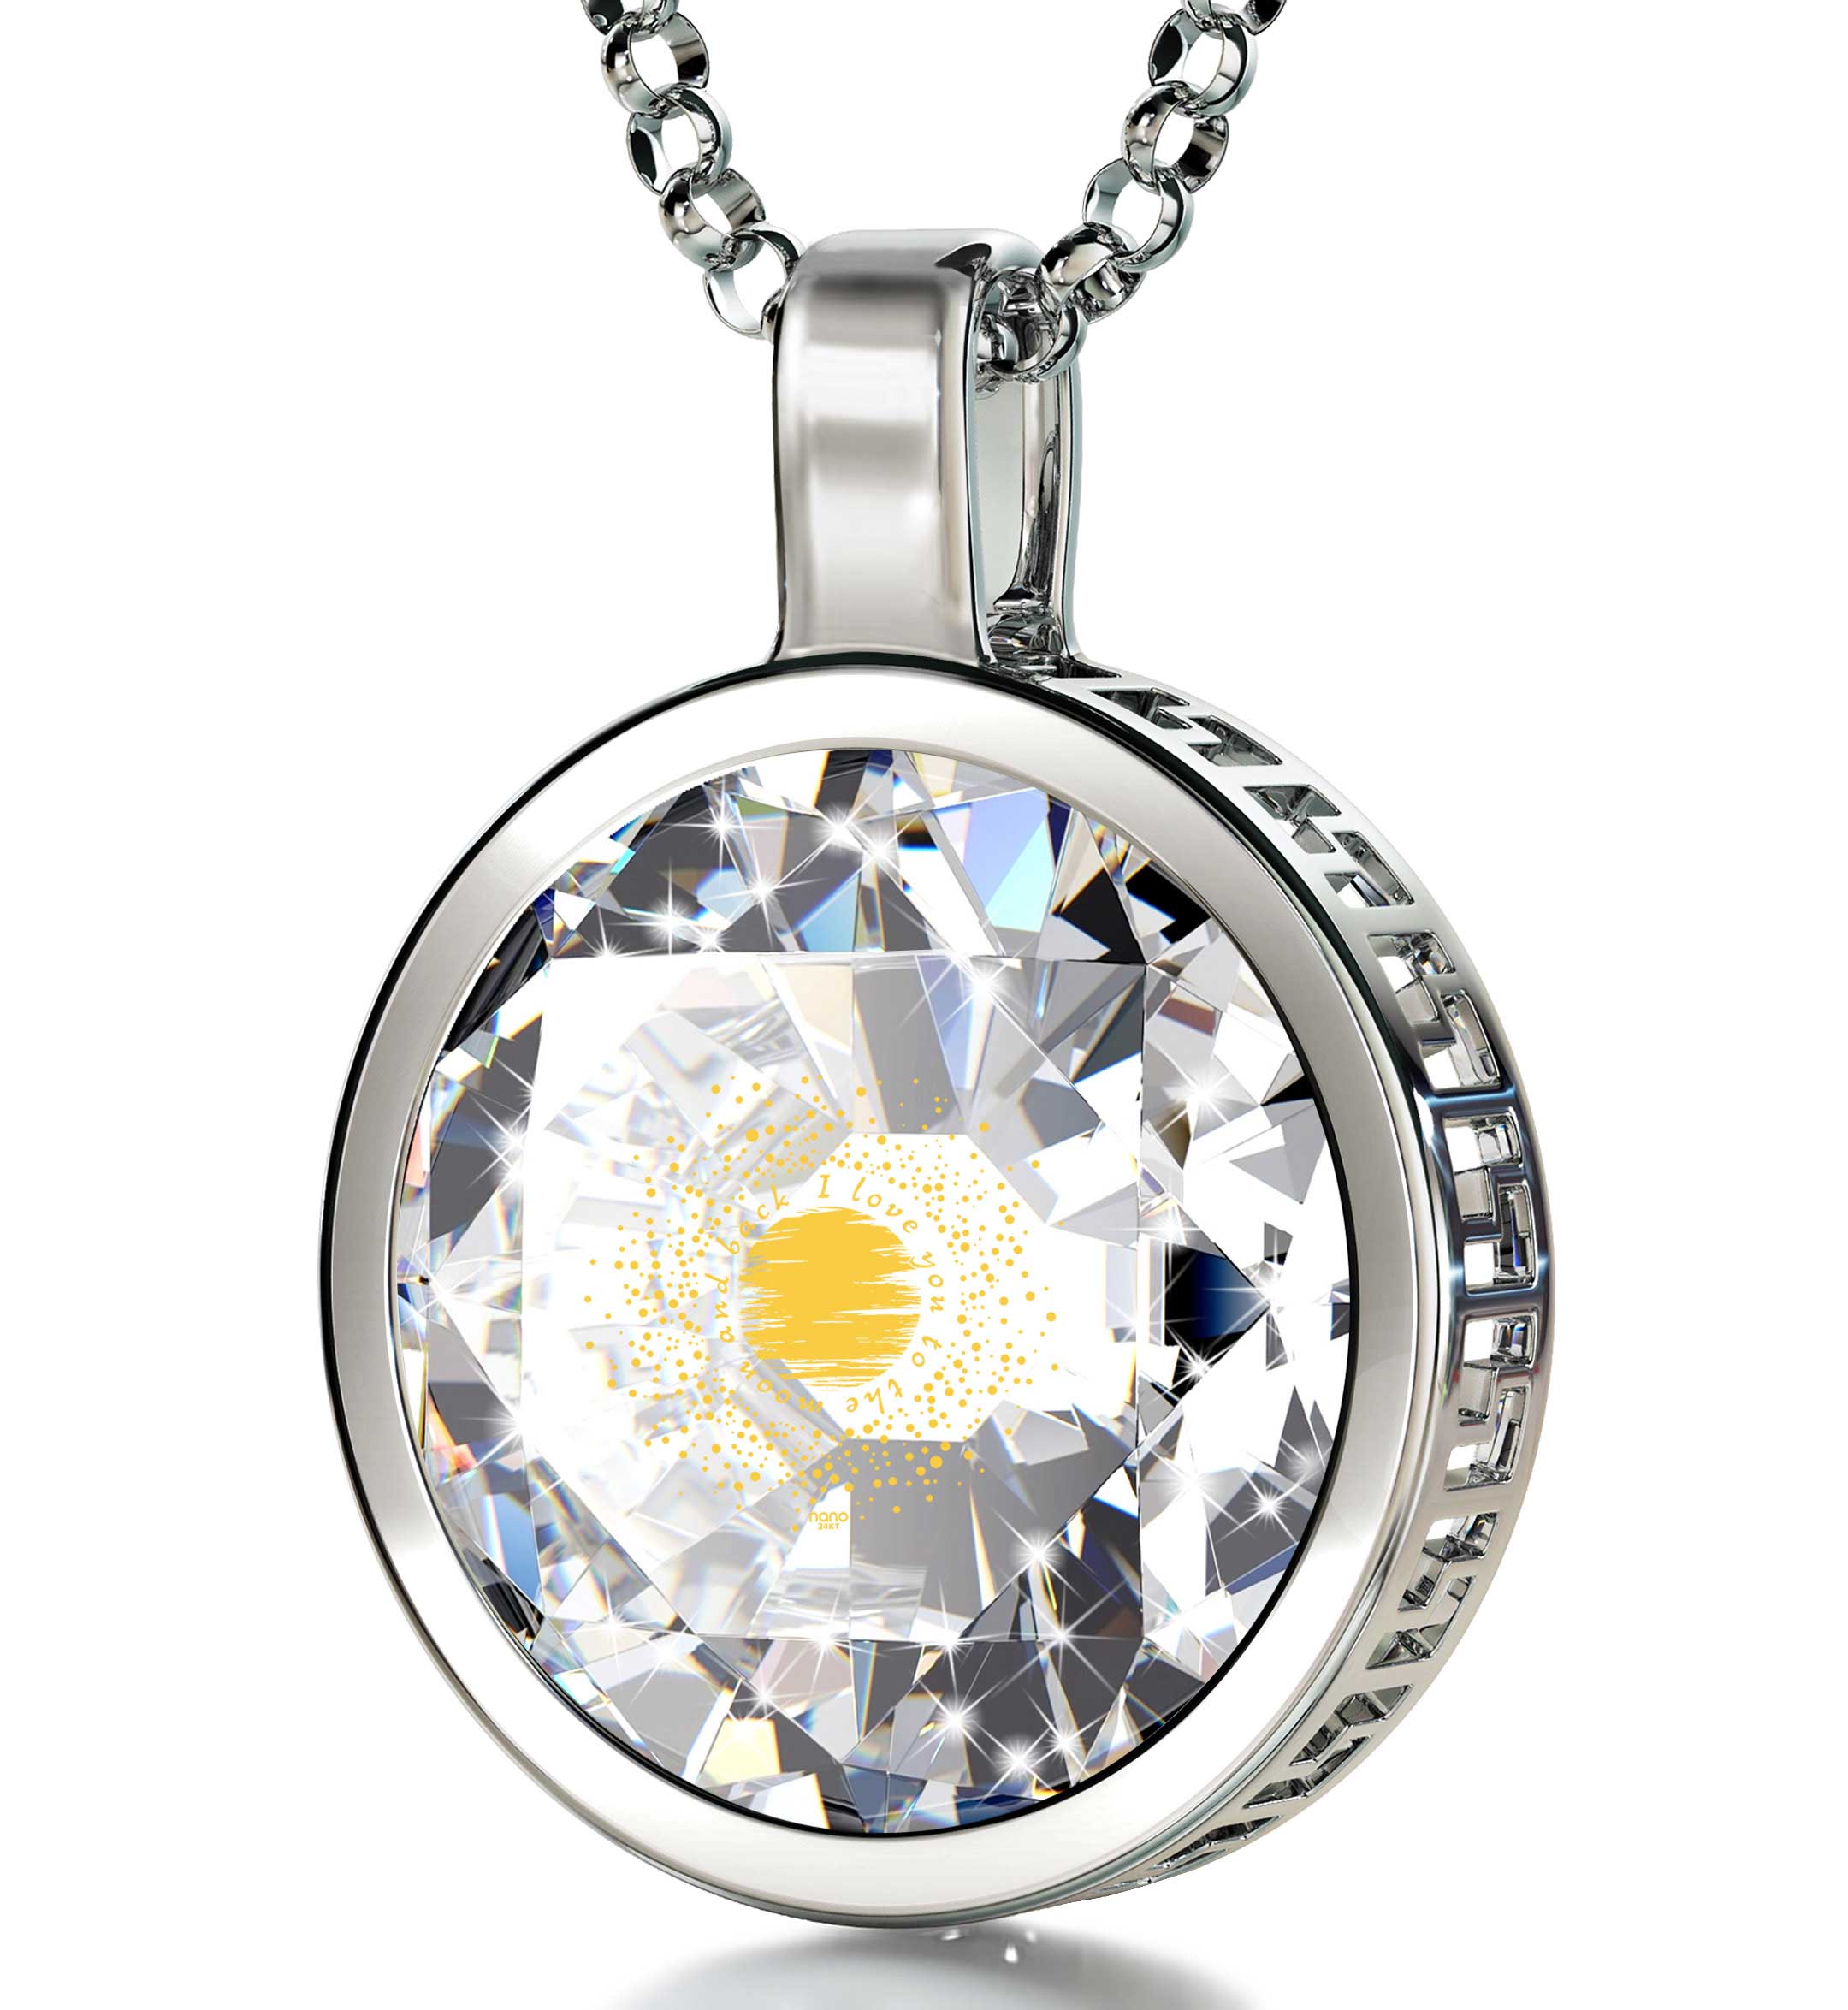 Zirconia Pendant - 'To the Moon and Back'